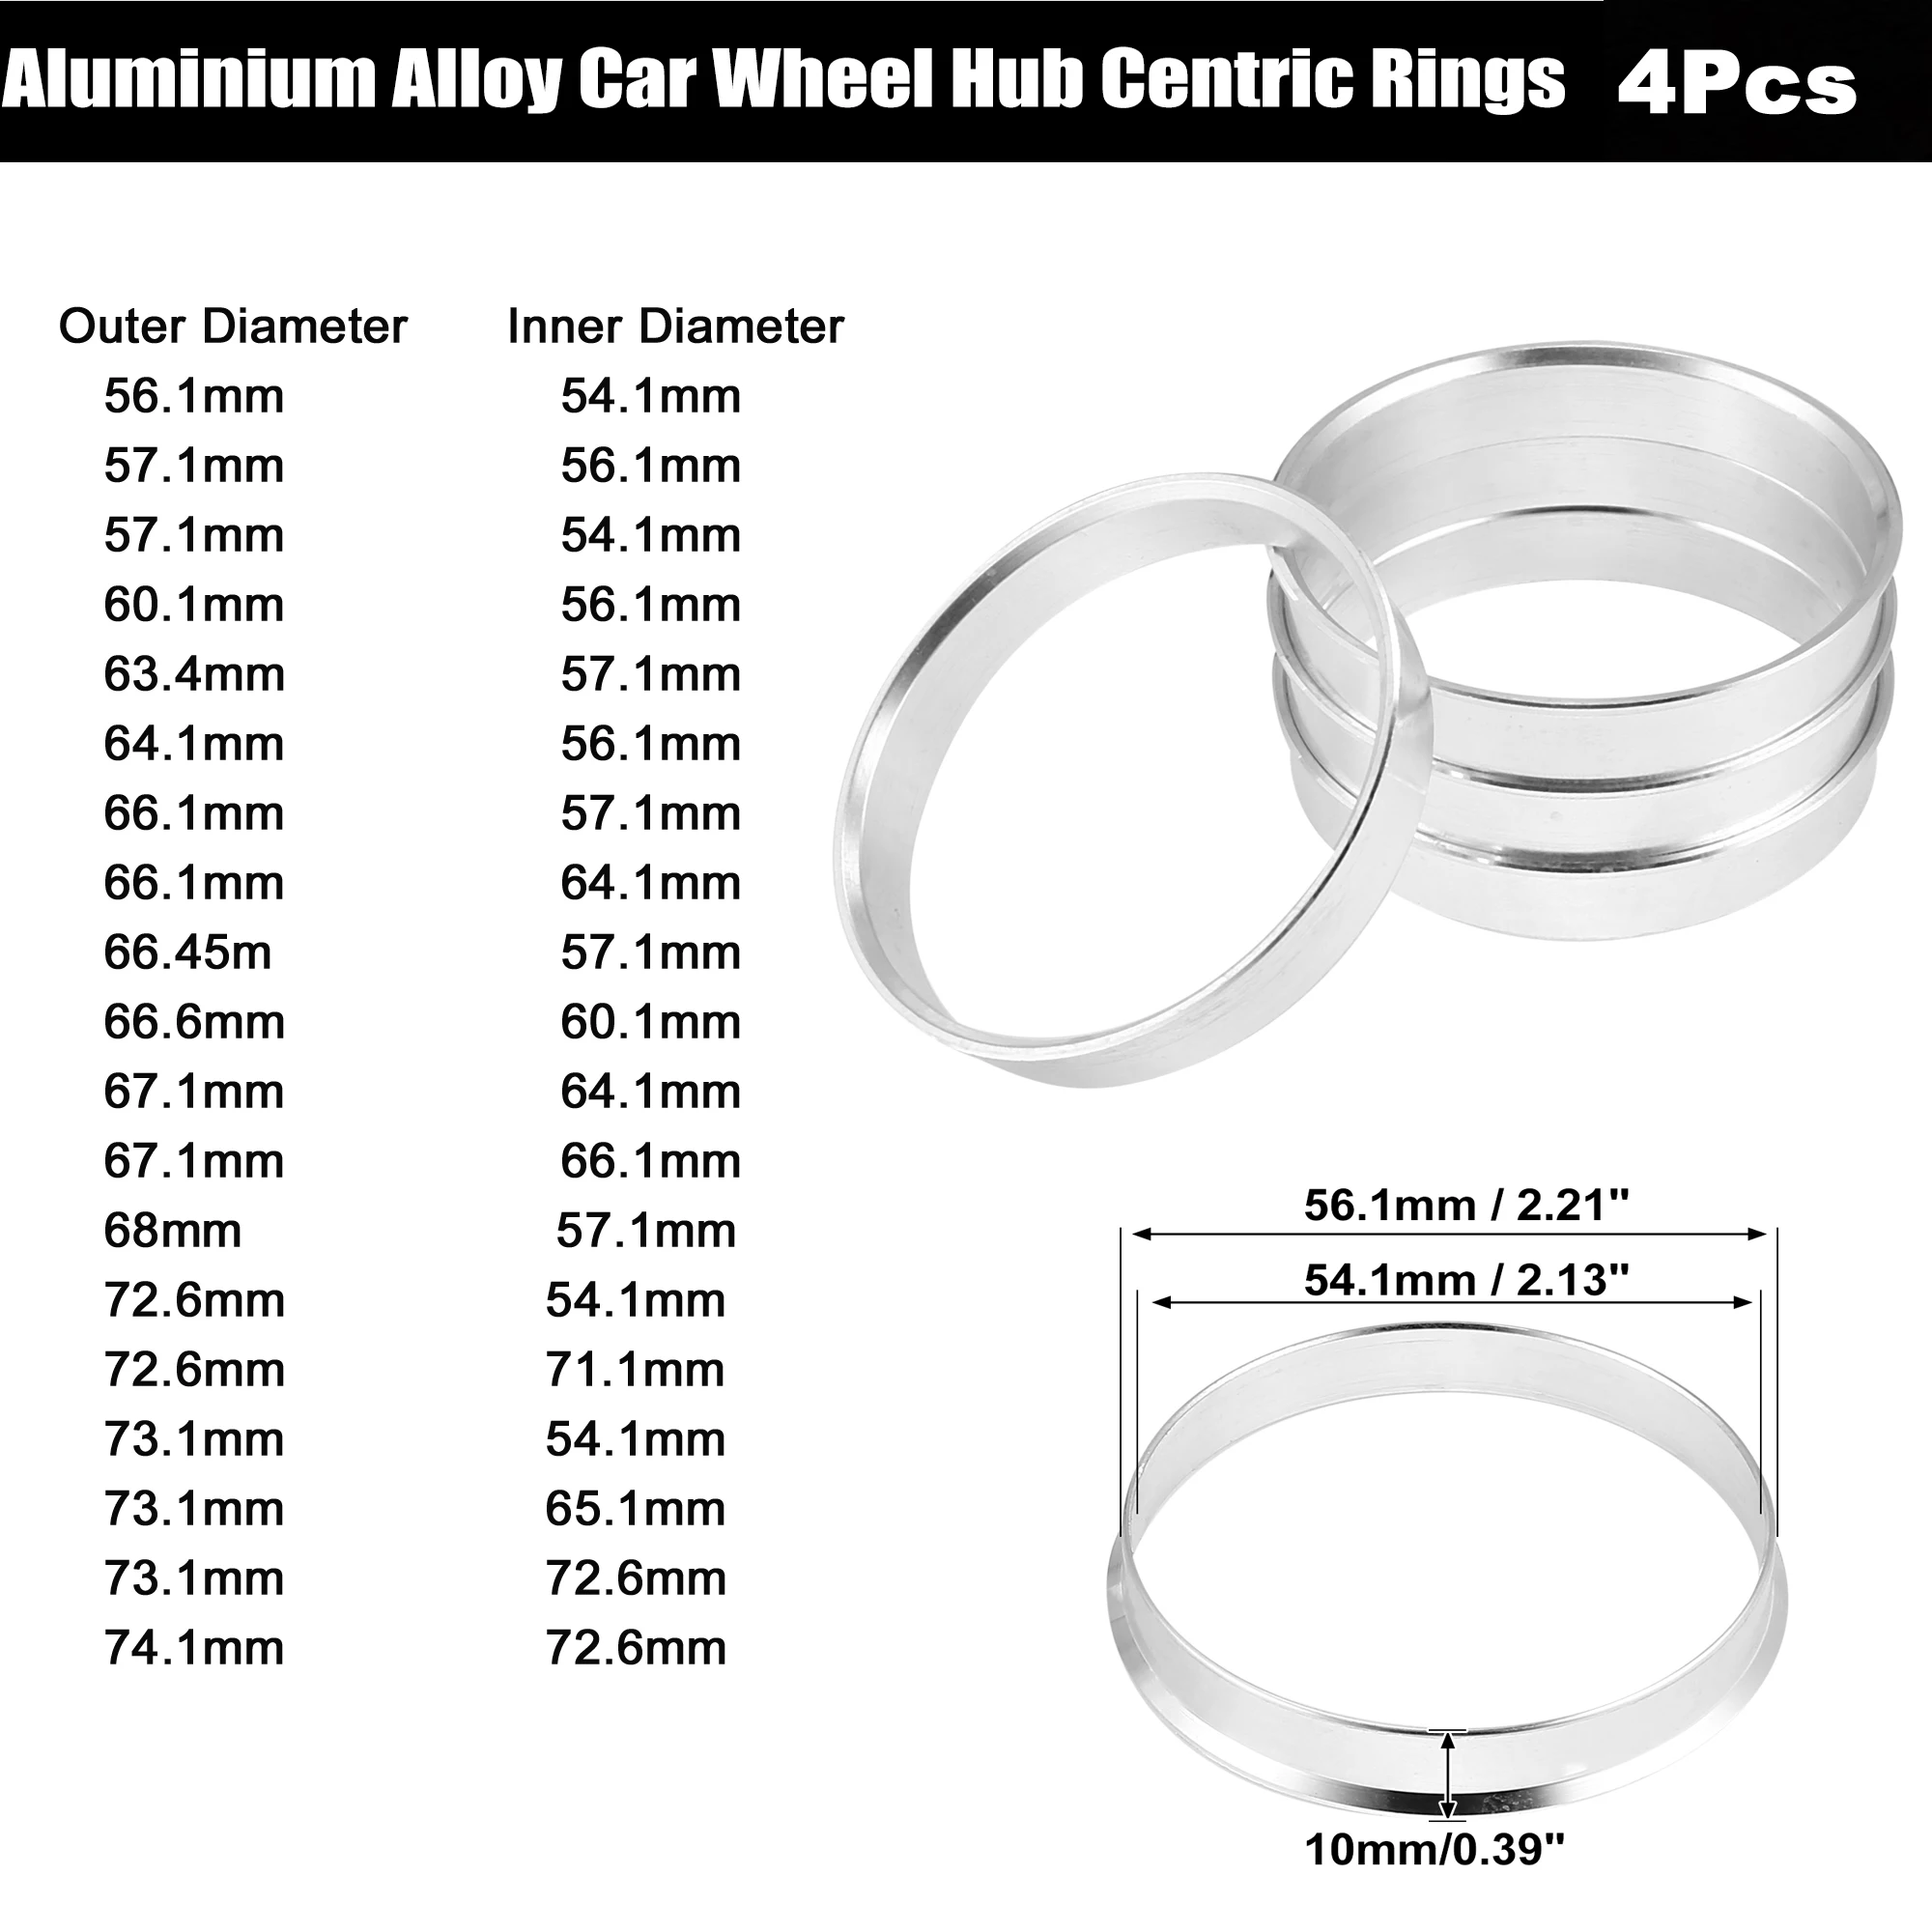 4pcs Hub Centric Rings 64.1mm to 56.1mm Hubcentric Ring 64.1 Fit for All Car uk 